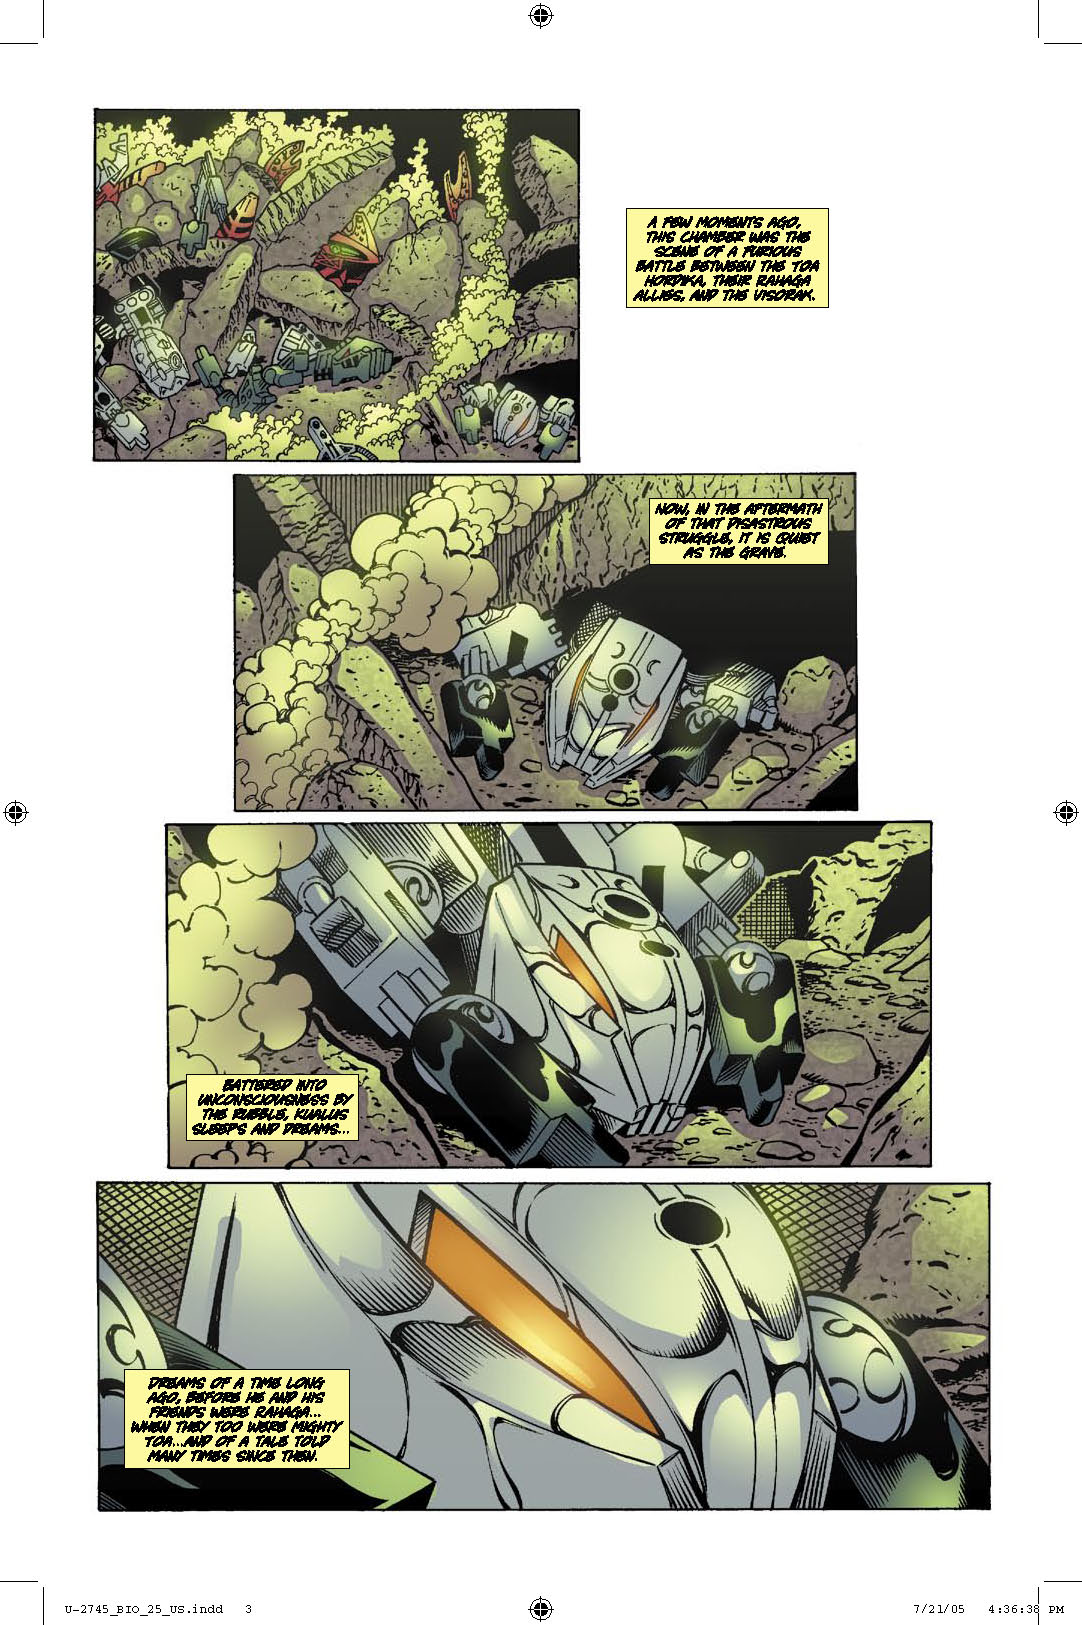 Read online Bionicle comic -  Issue #25 - 3